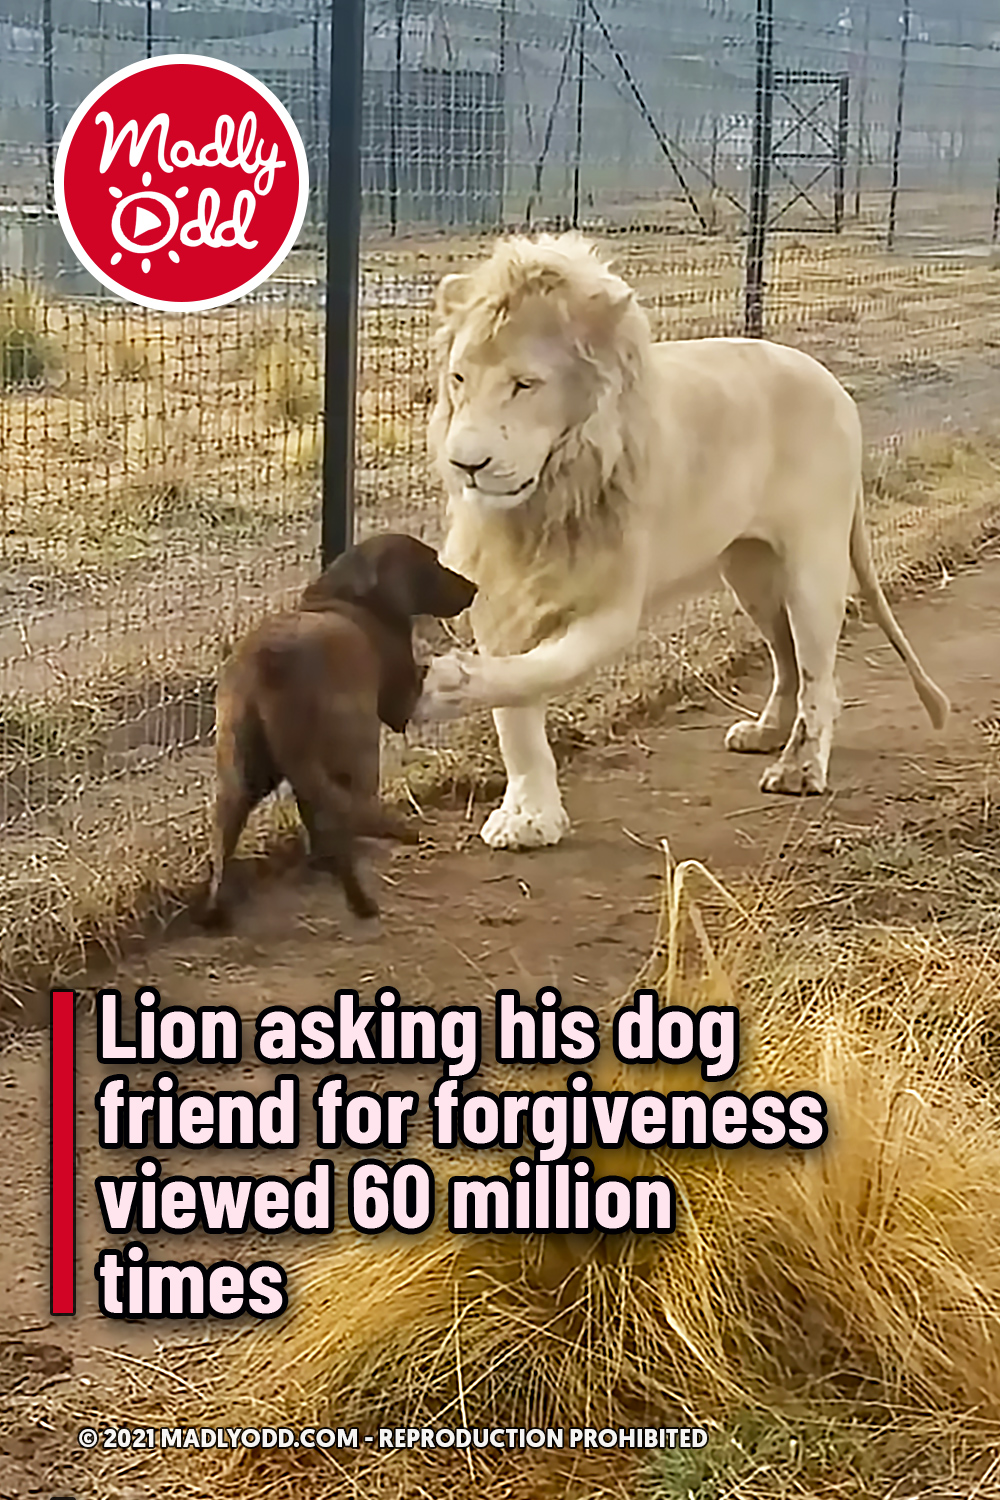 Lion asking his dog friend for forgiveness viewed 60 million times